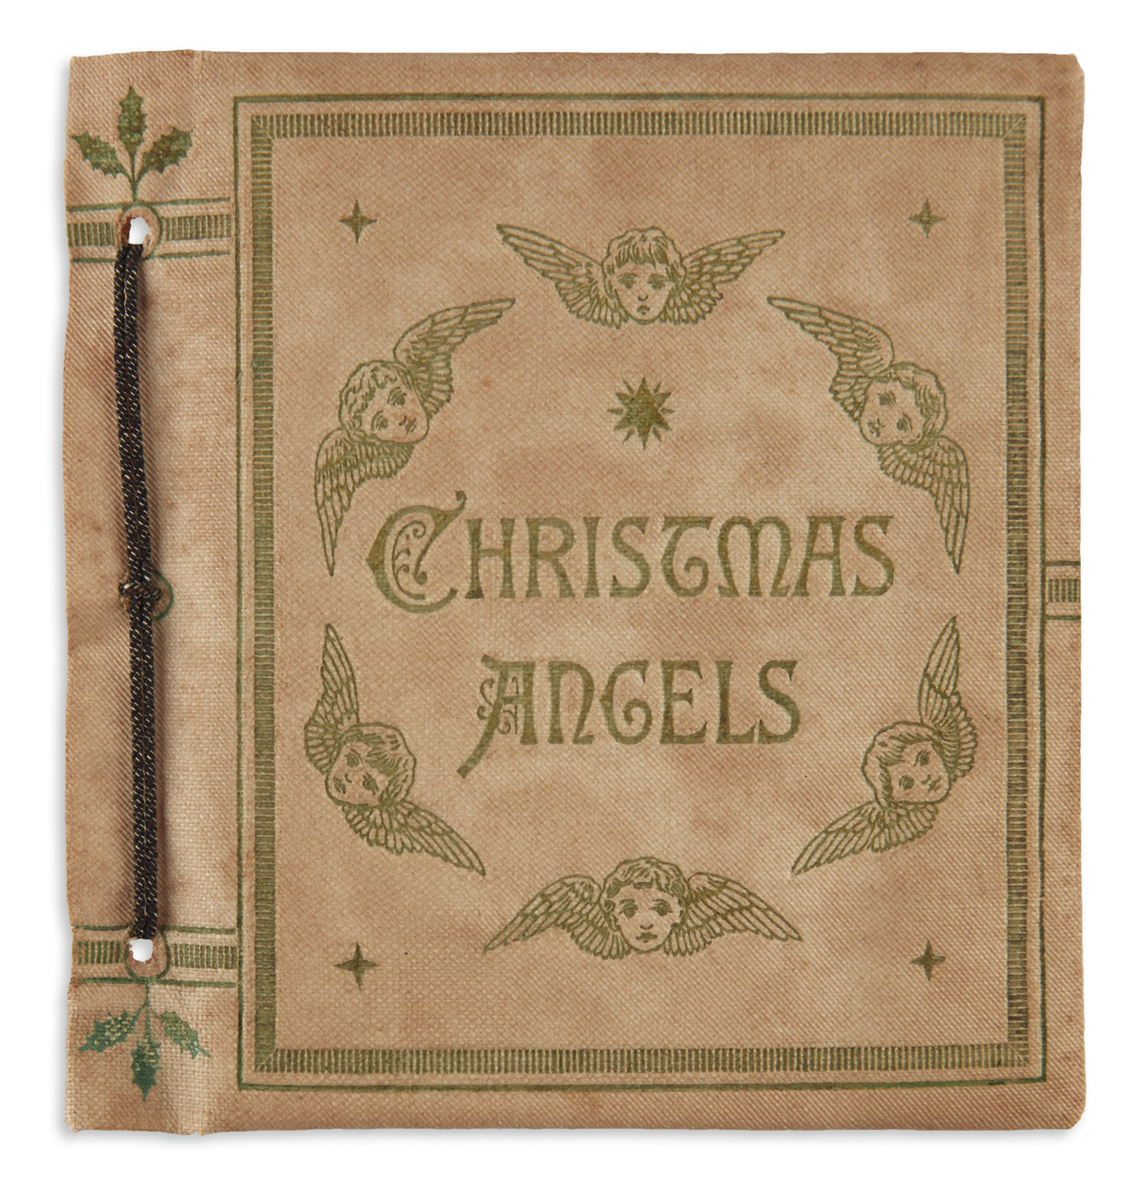 NIGHTINGALE, FLORENCE. Christmas card, Signed and Inscribed: